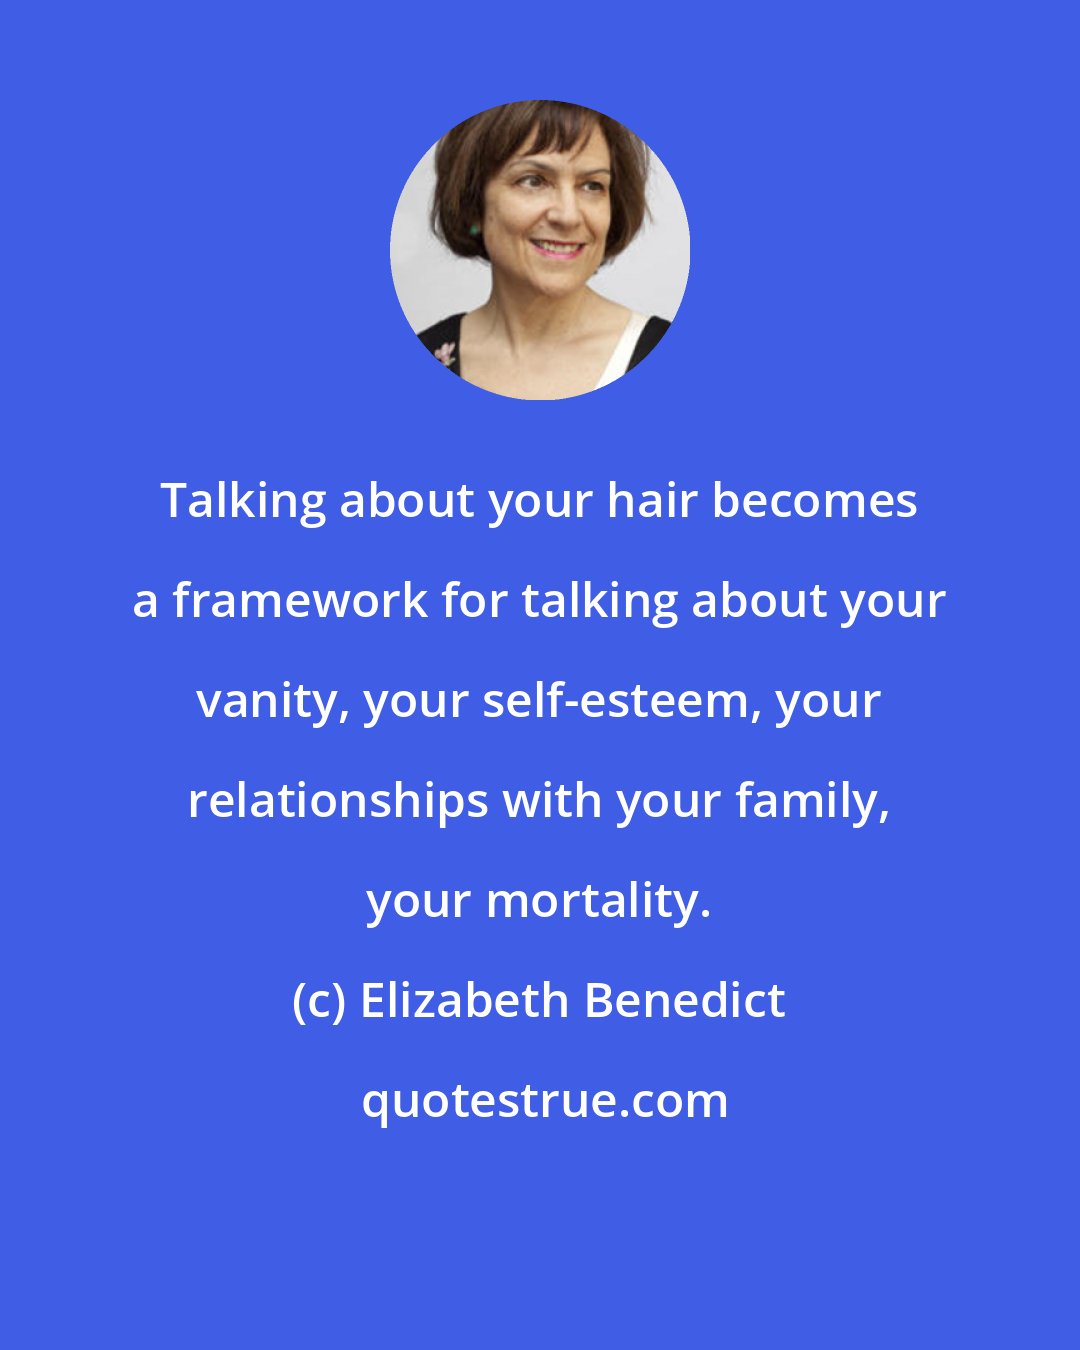 Elizabeth Benedict: Talking about your hair becomes a framework for talking about your vanity, your self-esteem, your relationships with your family, your mortality.